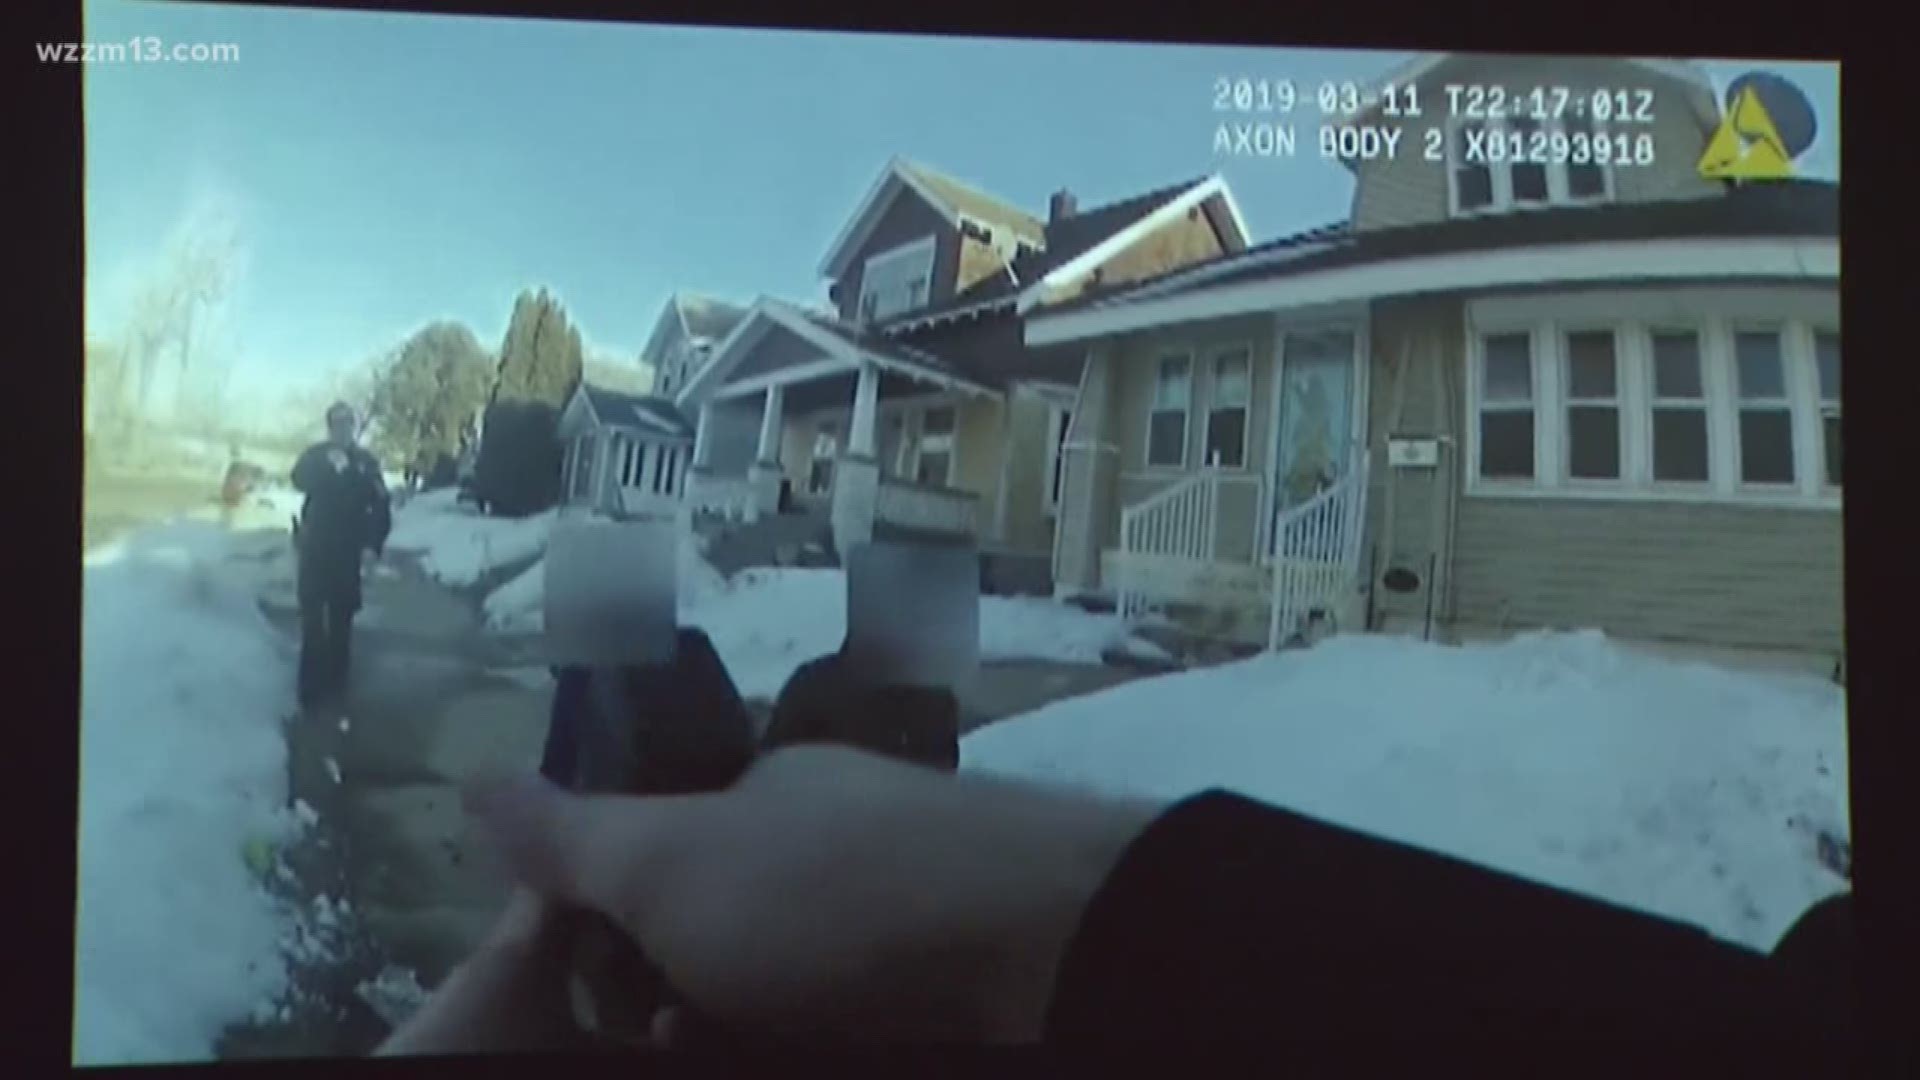 Civil rights hearings for Grand Rapids Police videos